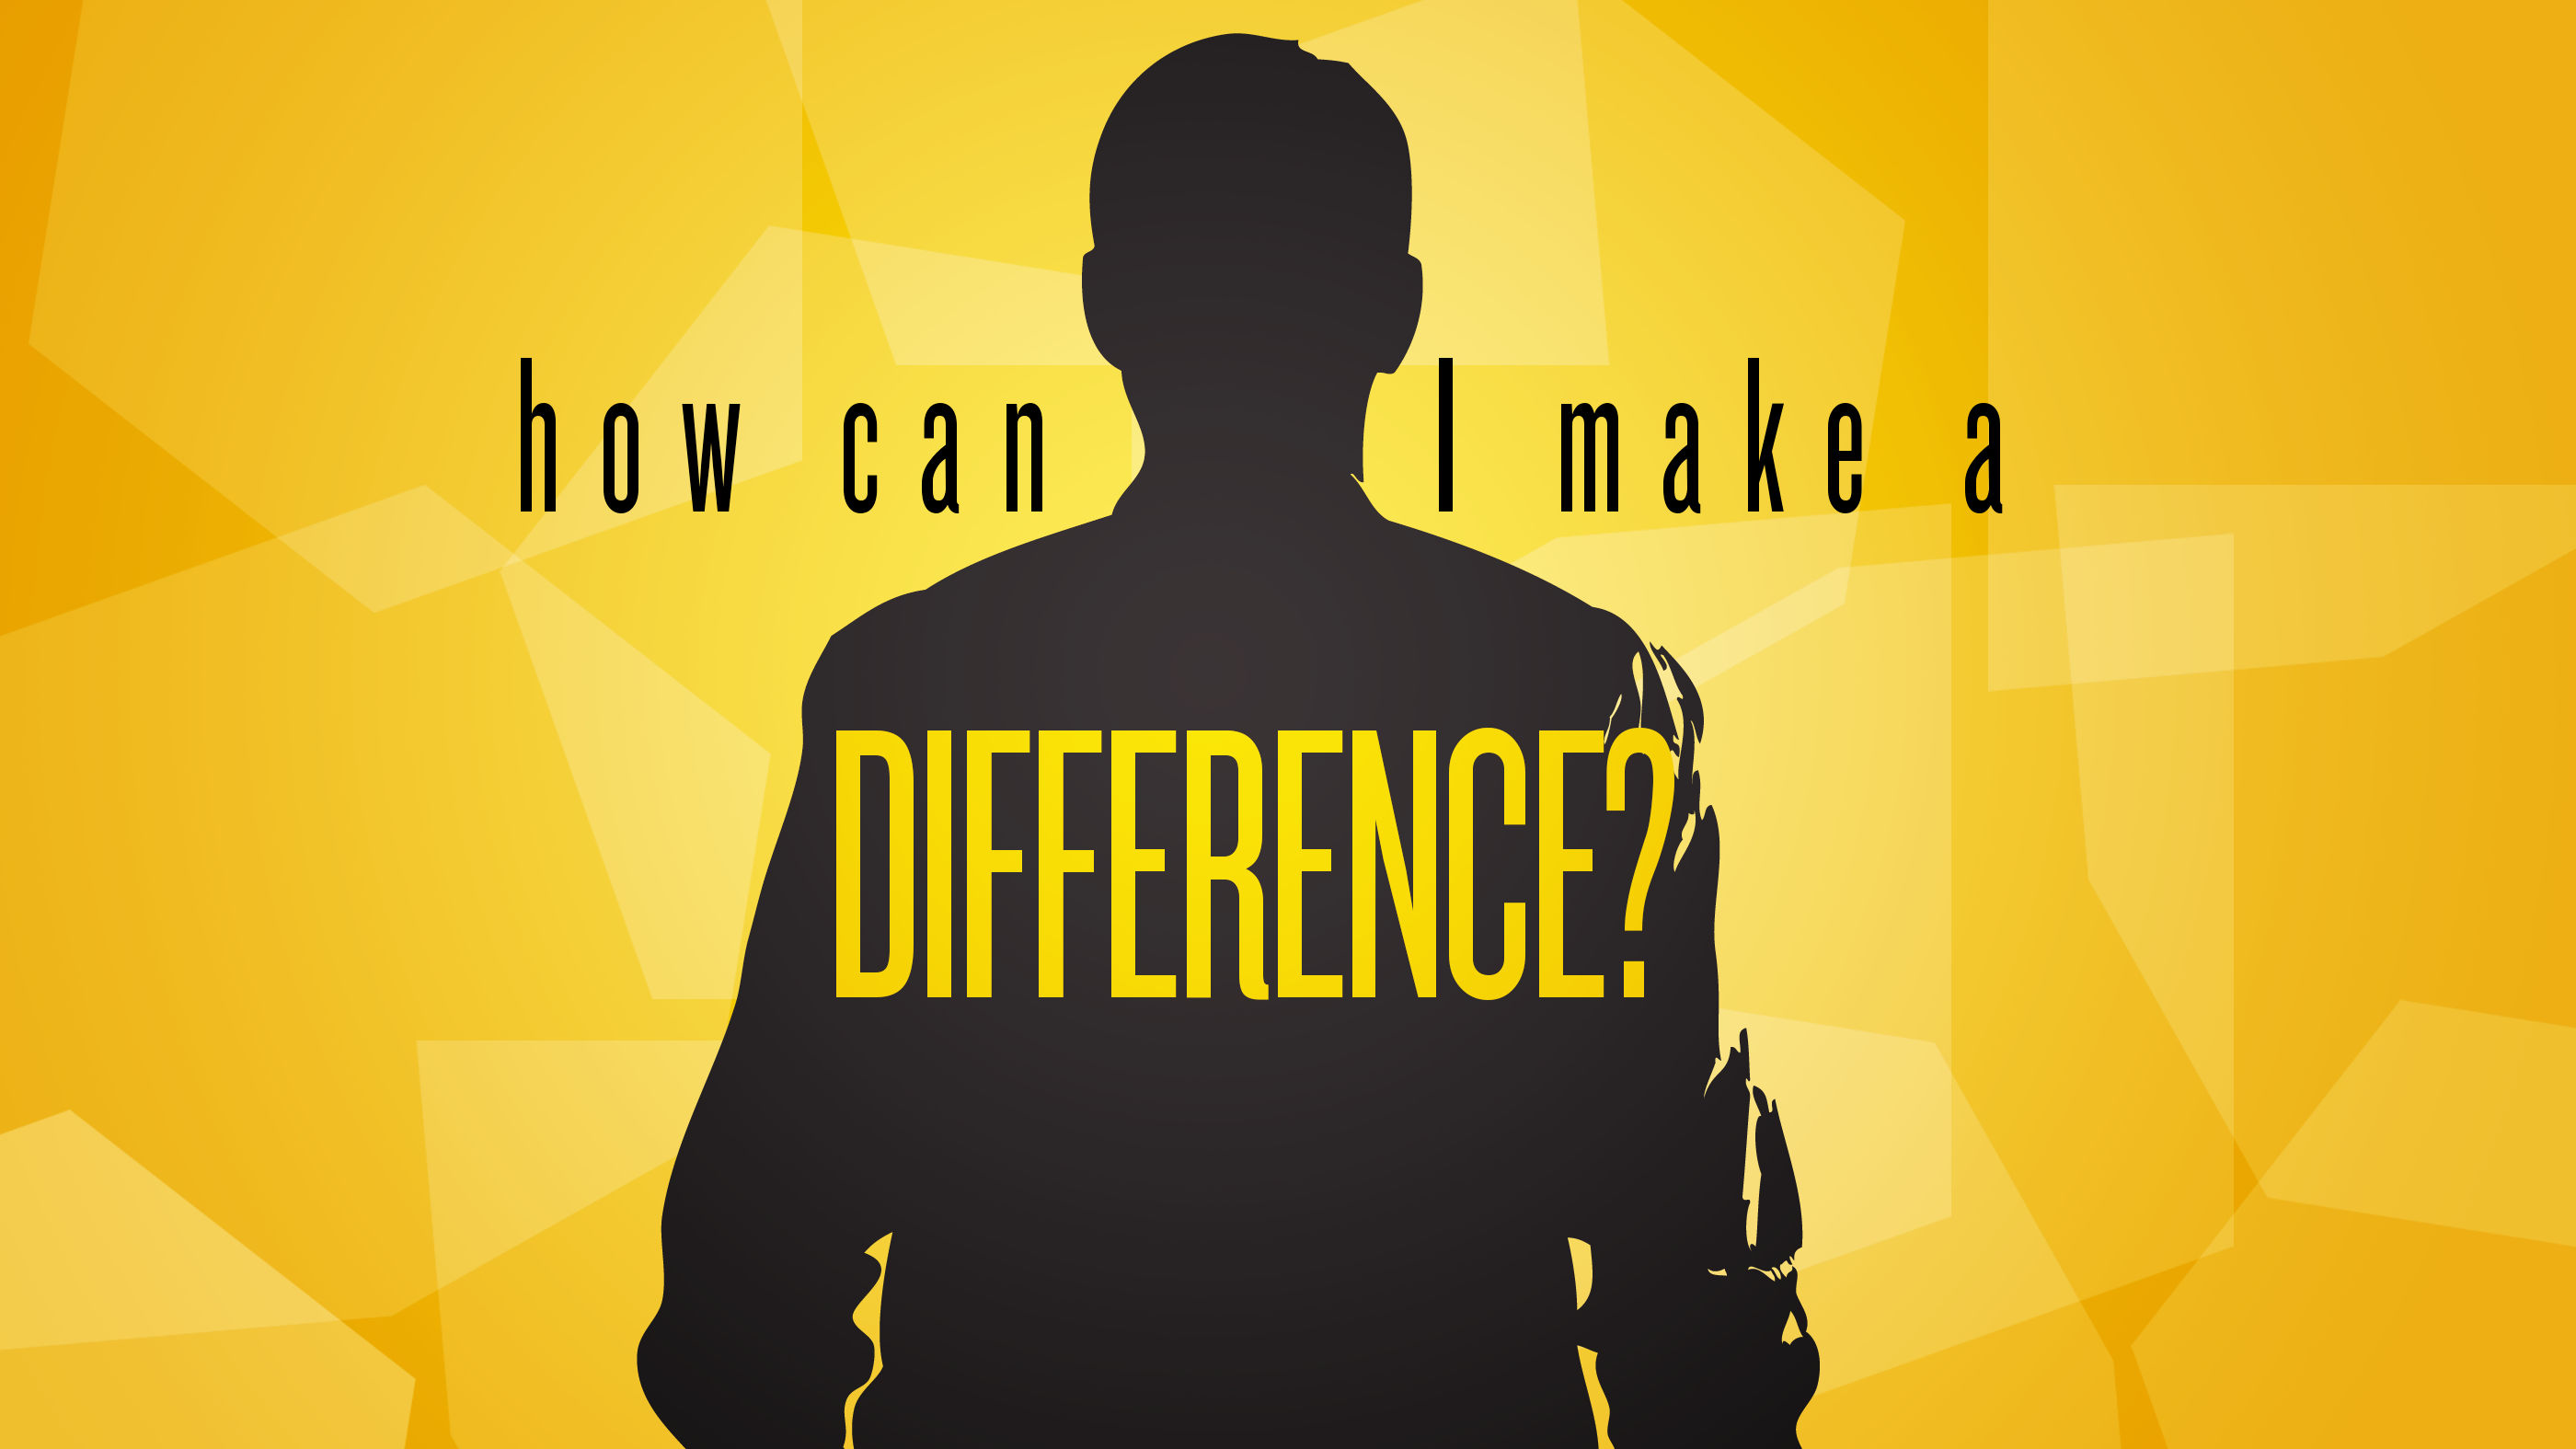 How can I make a DIFFERENCE?